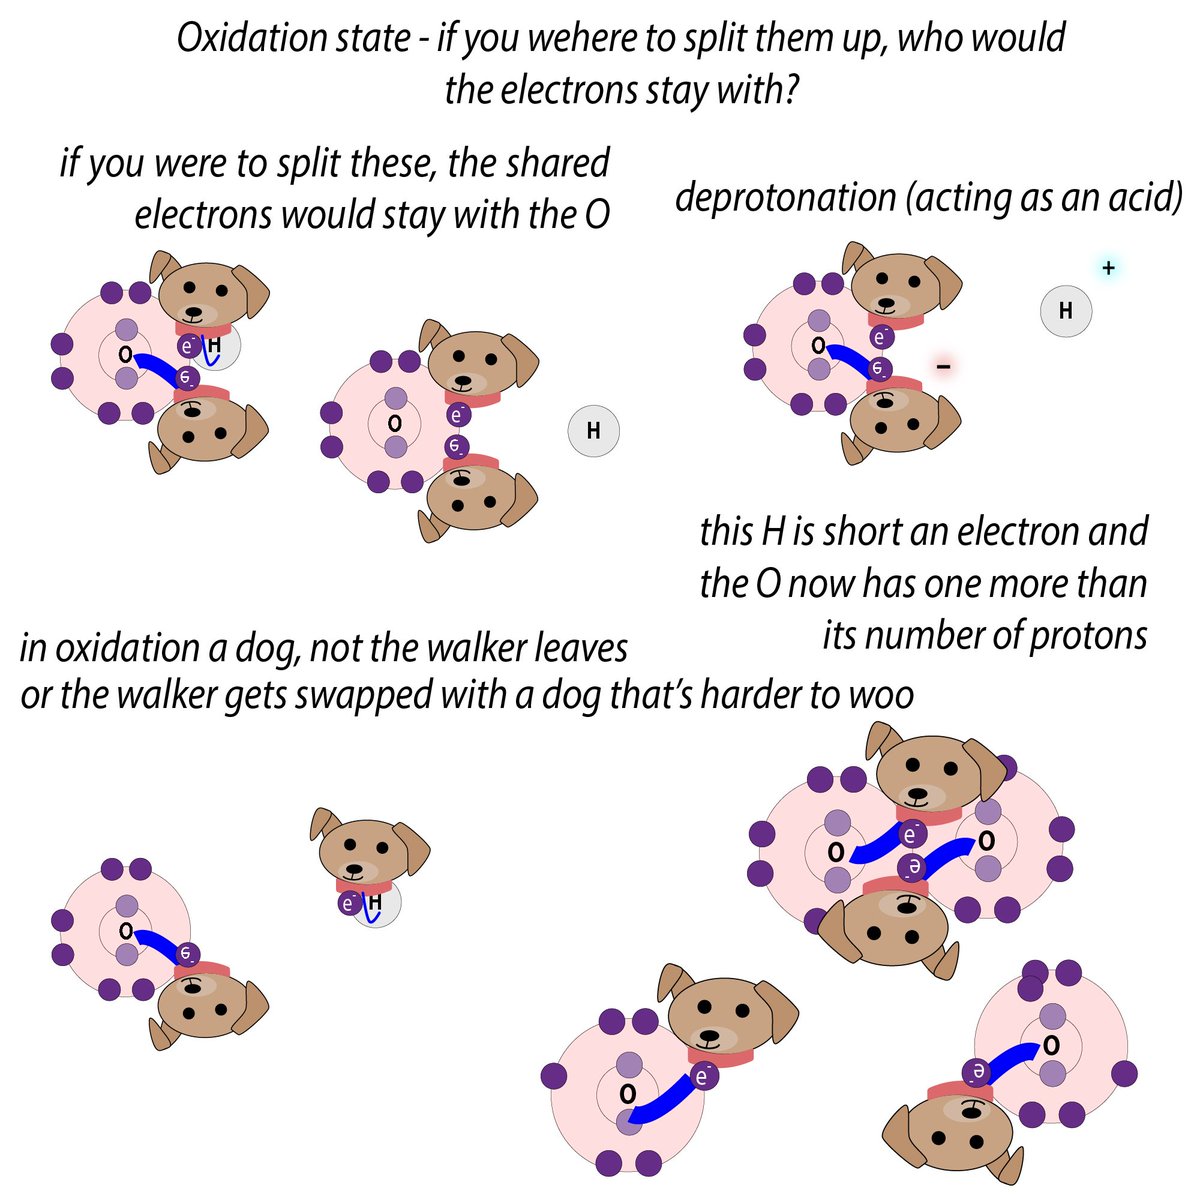 Who let the dogs out? The reducing agent but NOT the acid! The acid let out a dogless dog walker! Acid/base reactions DIFFER from redox - let me explain in a way that’s unorthodox…  http://bit.ly/2XBhNUQ  #365DaysOfScience  #biochemistry  #scicomm  #realtimechem